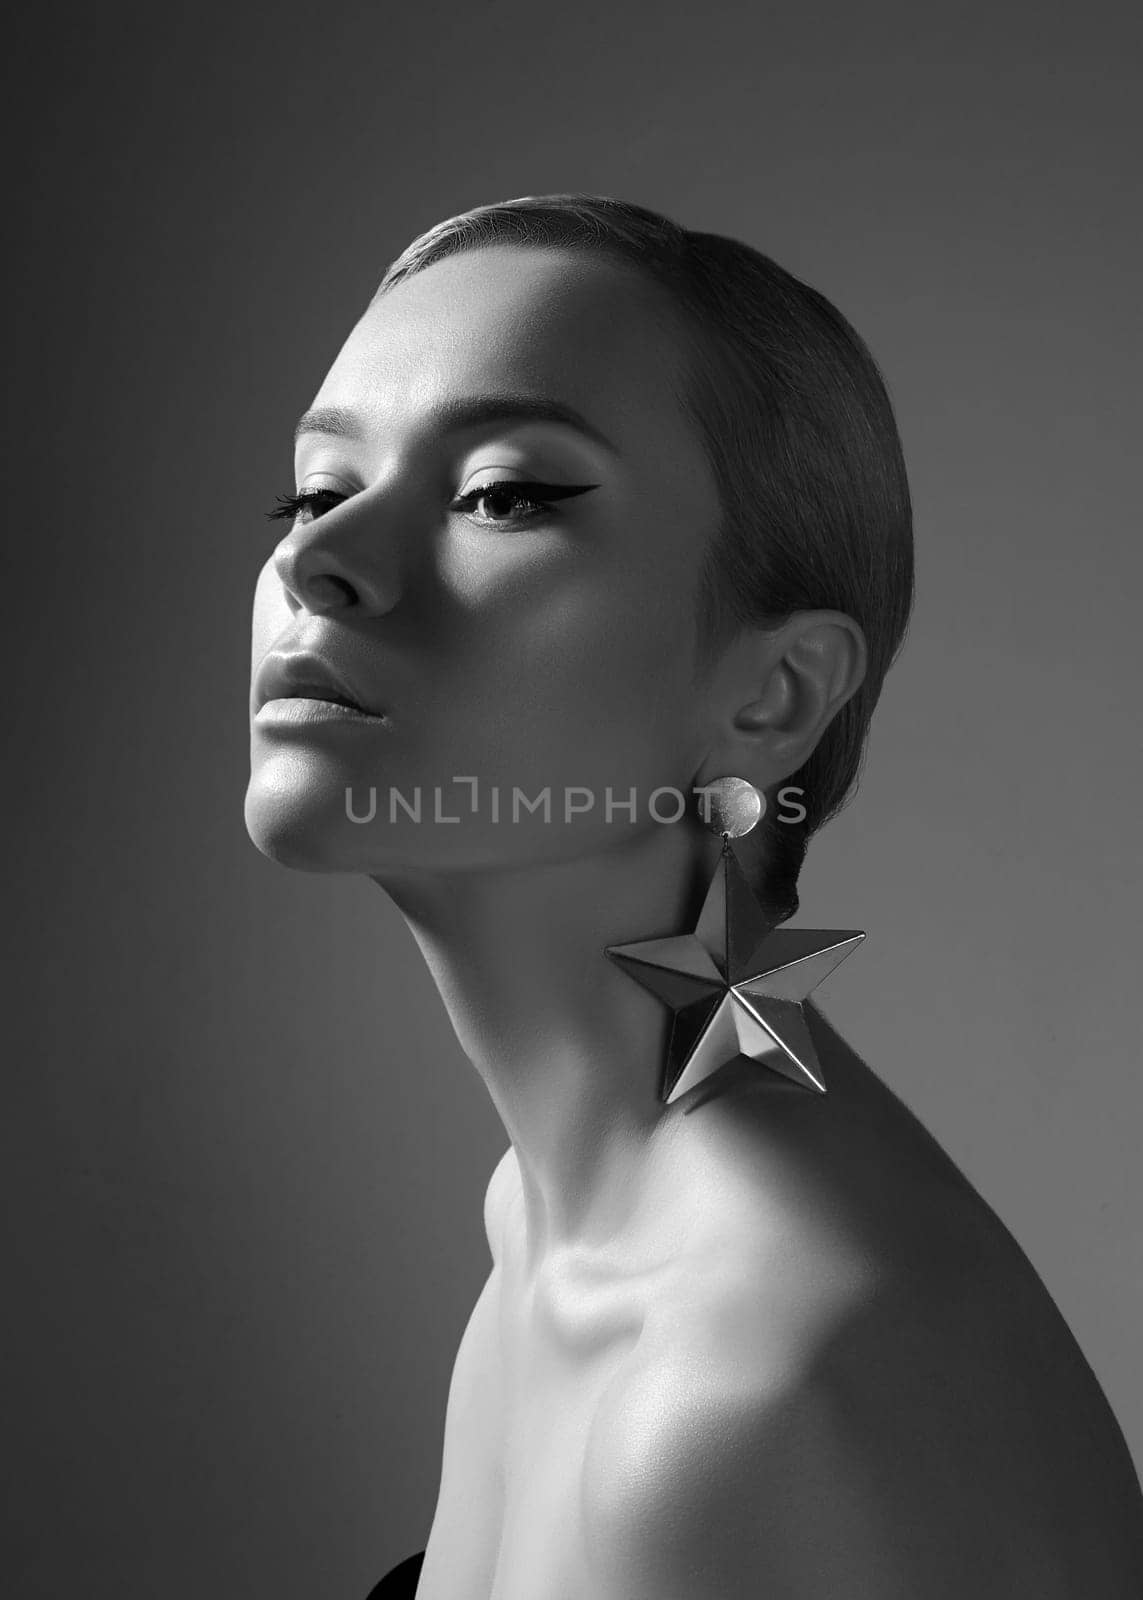 Black and White Art Studio Portrait with Perfect Rembrandt Lighting. Beautiful Elegant Woman in Retro Style with Slicked Back Hair. Elegant Cinema Look